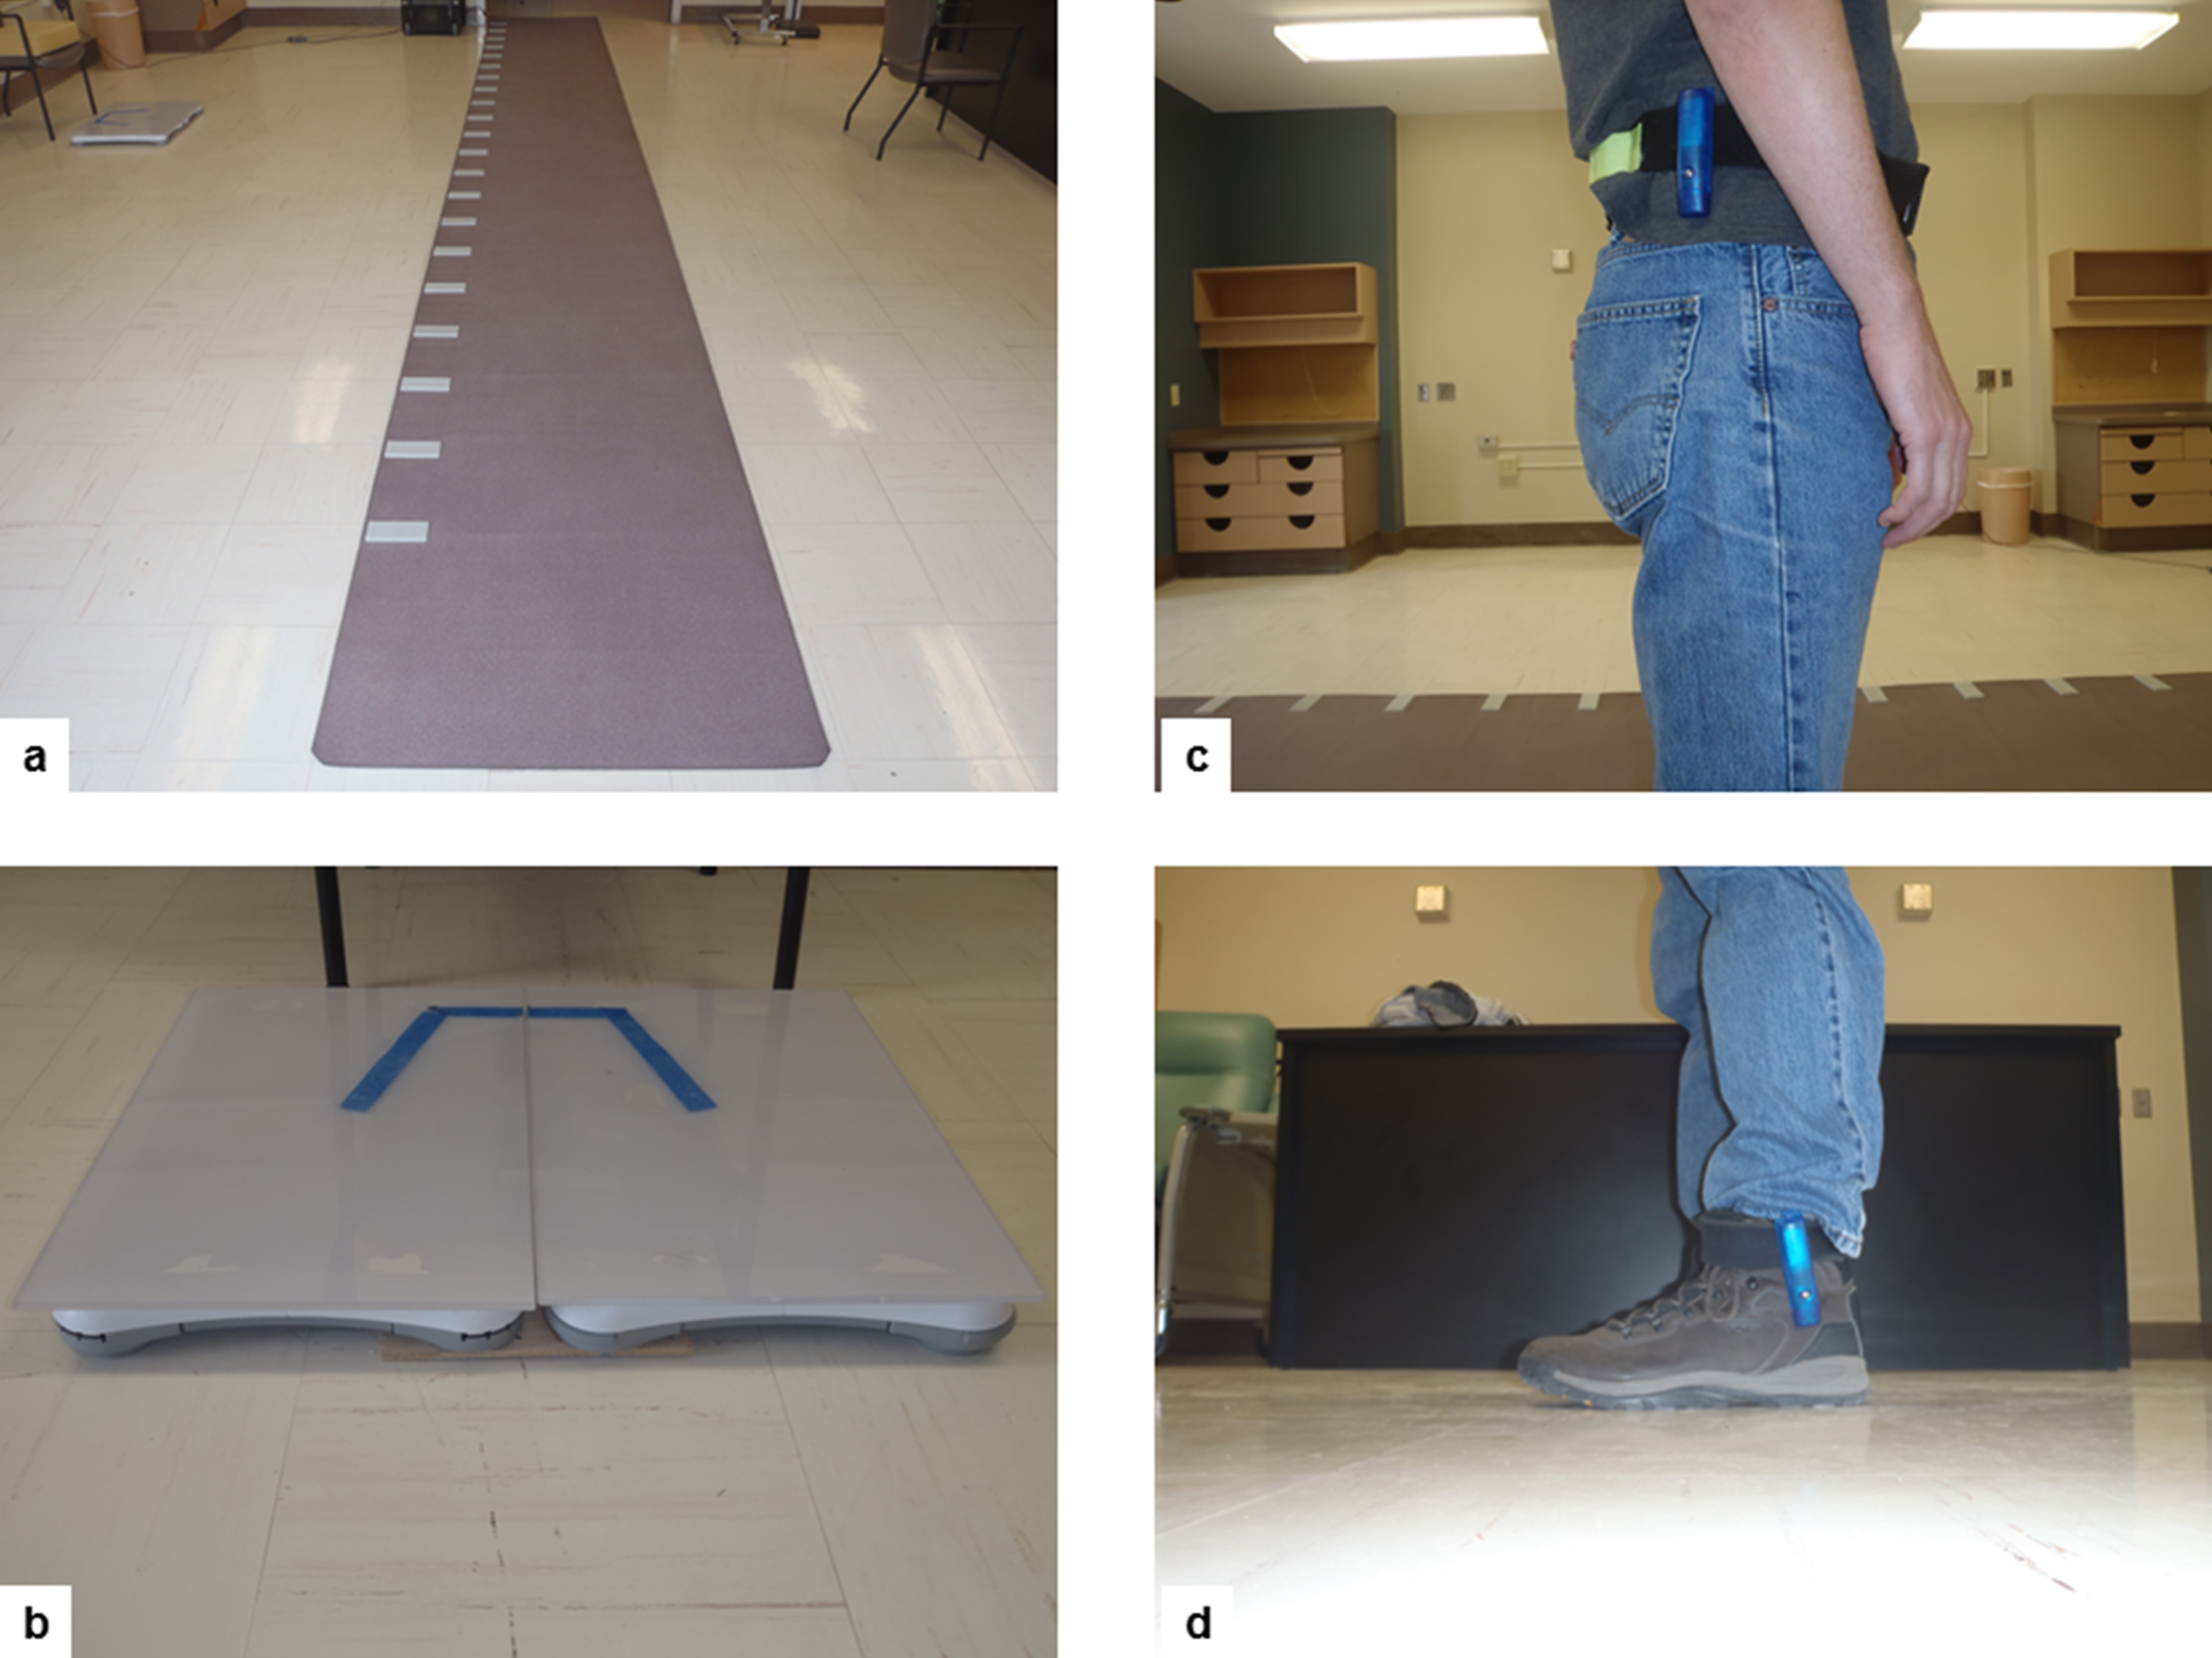 Equipment that will be used to assess gait and balance performance: (a) GaitRITE® mat for gait assessments; (b) Wii board adapted to assess balance control during rest conditions and sit-to-stand transitions; (c) Accelerometers attached to hips and ankles will be used in sites where they are available.